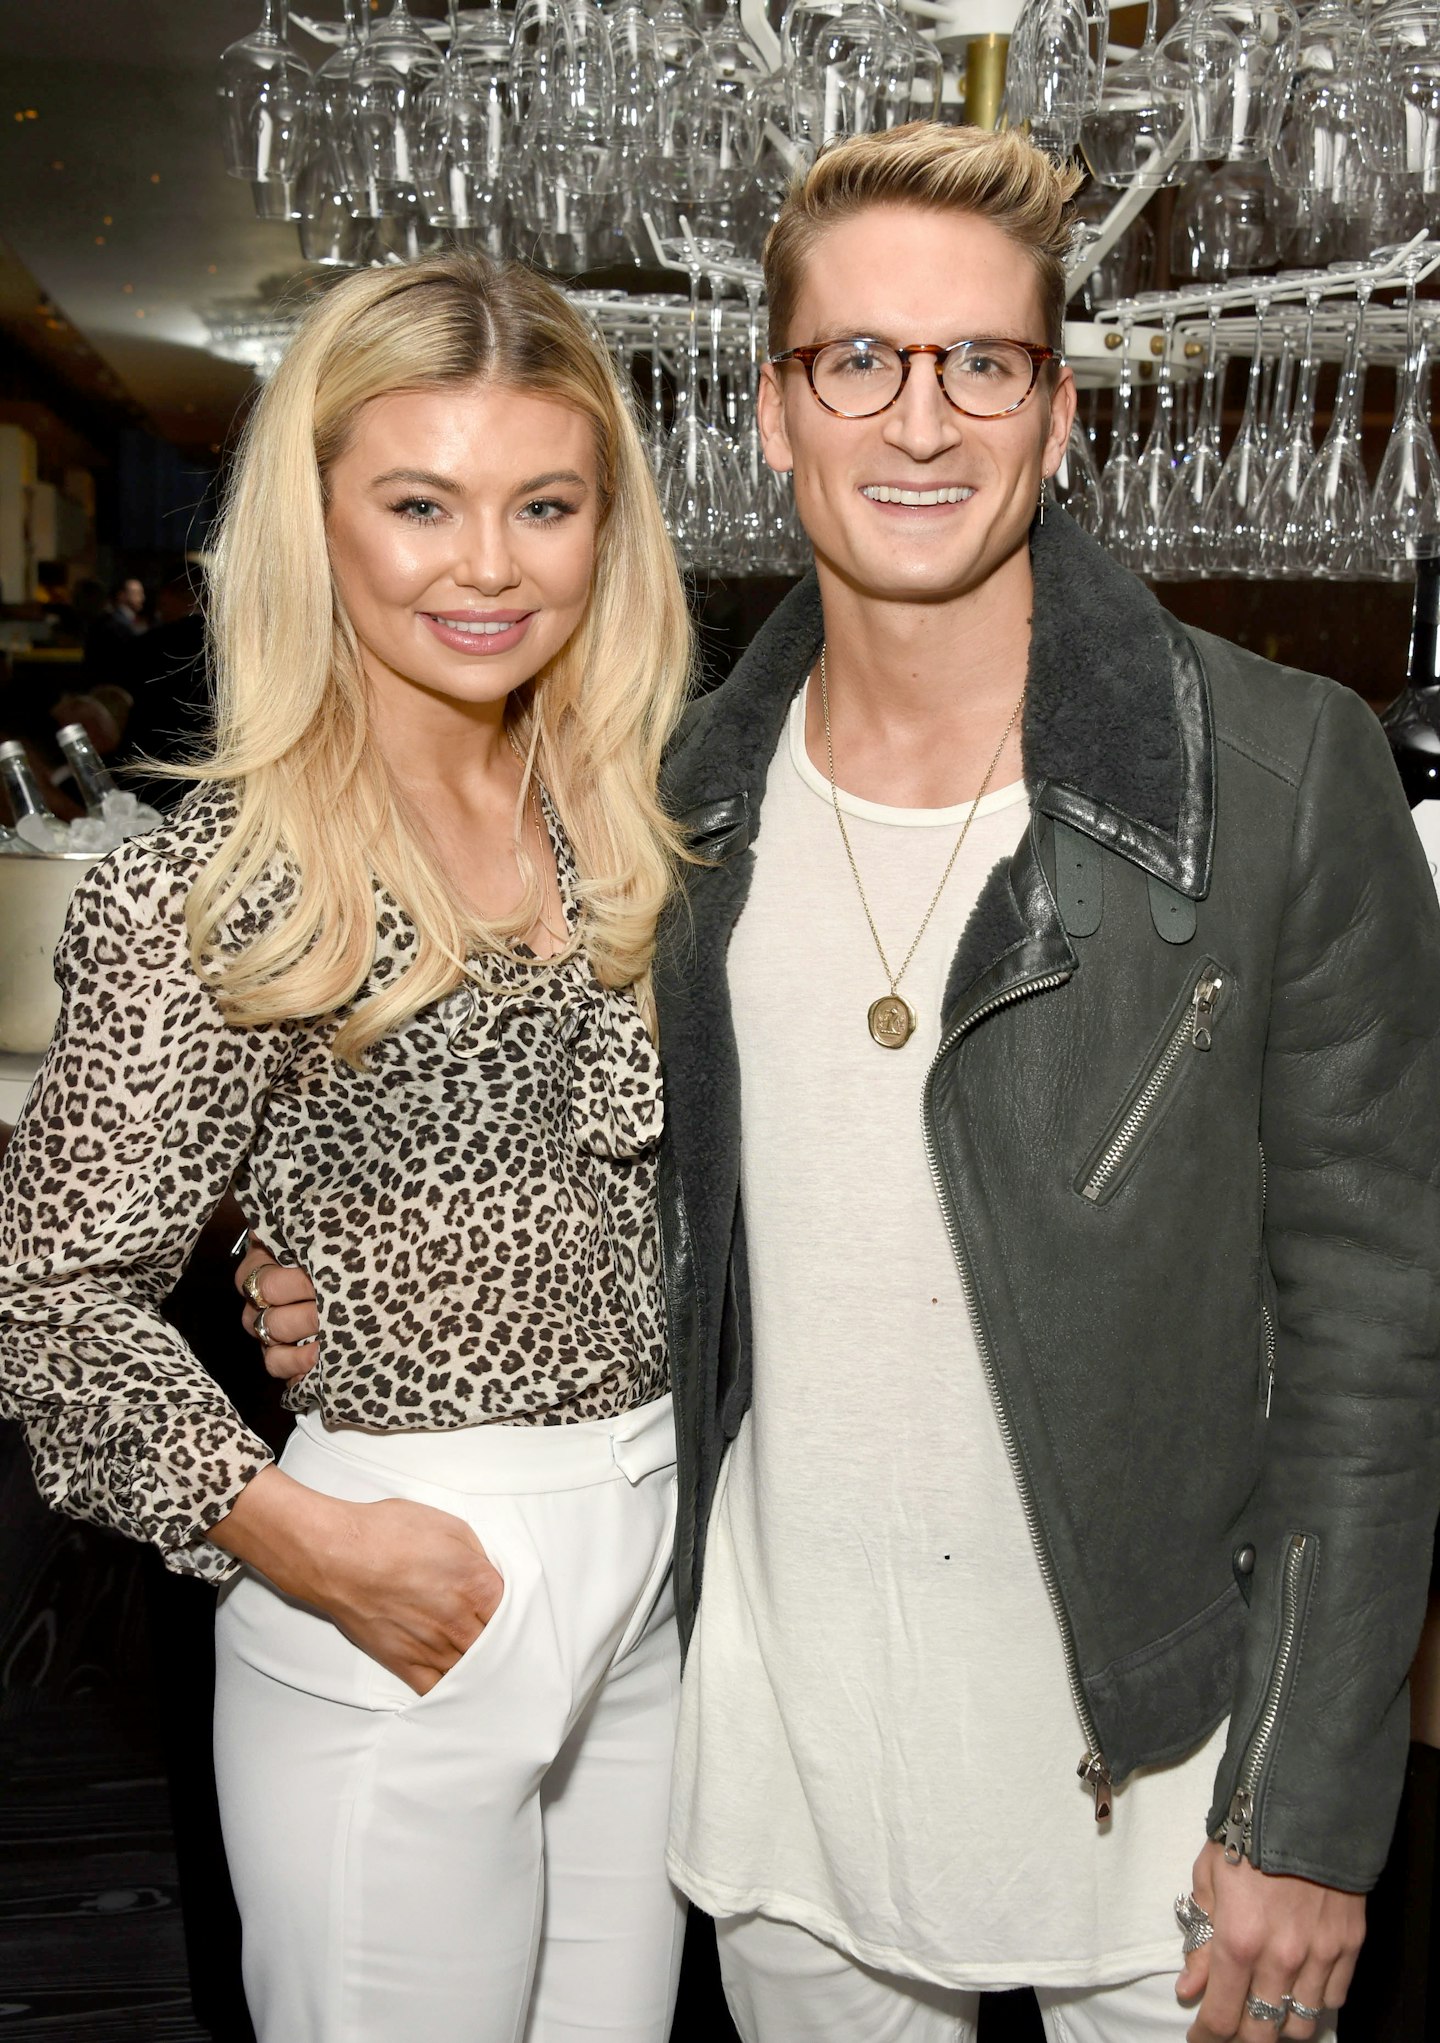 TOFF AND PROUDLOCK